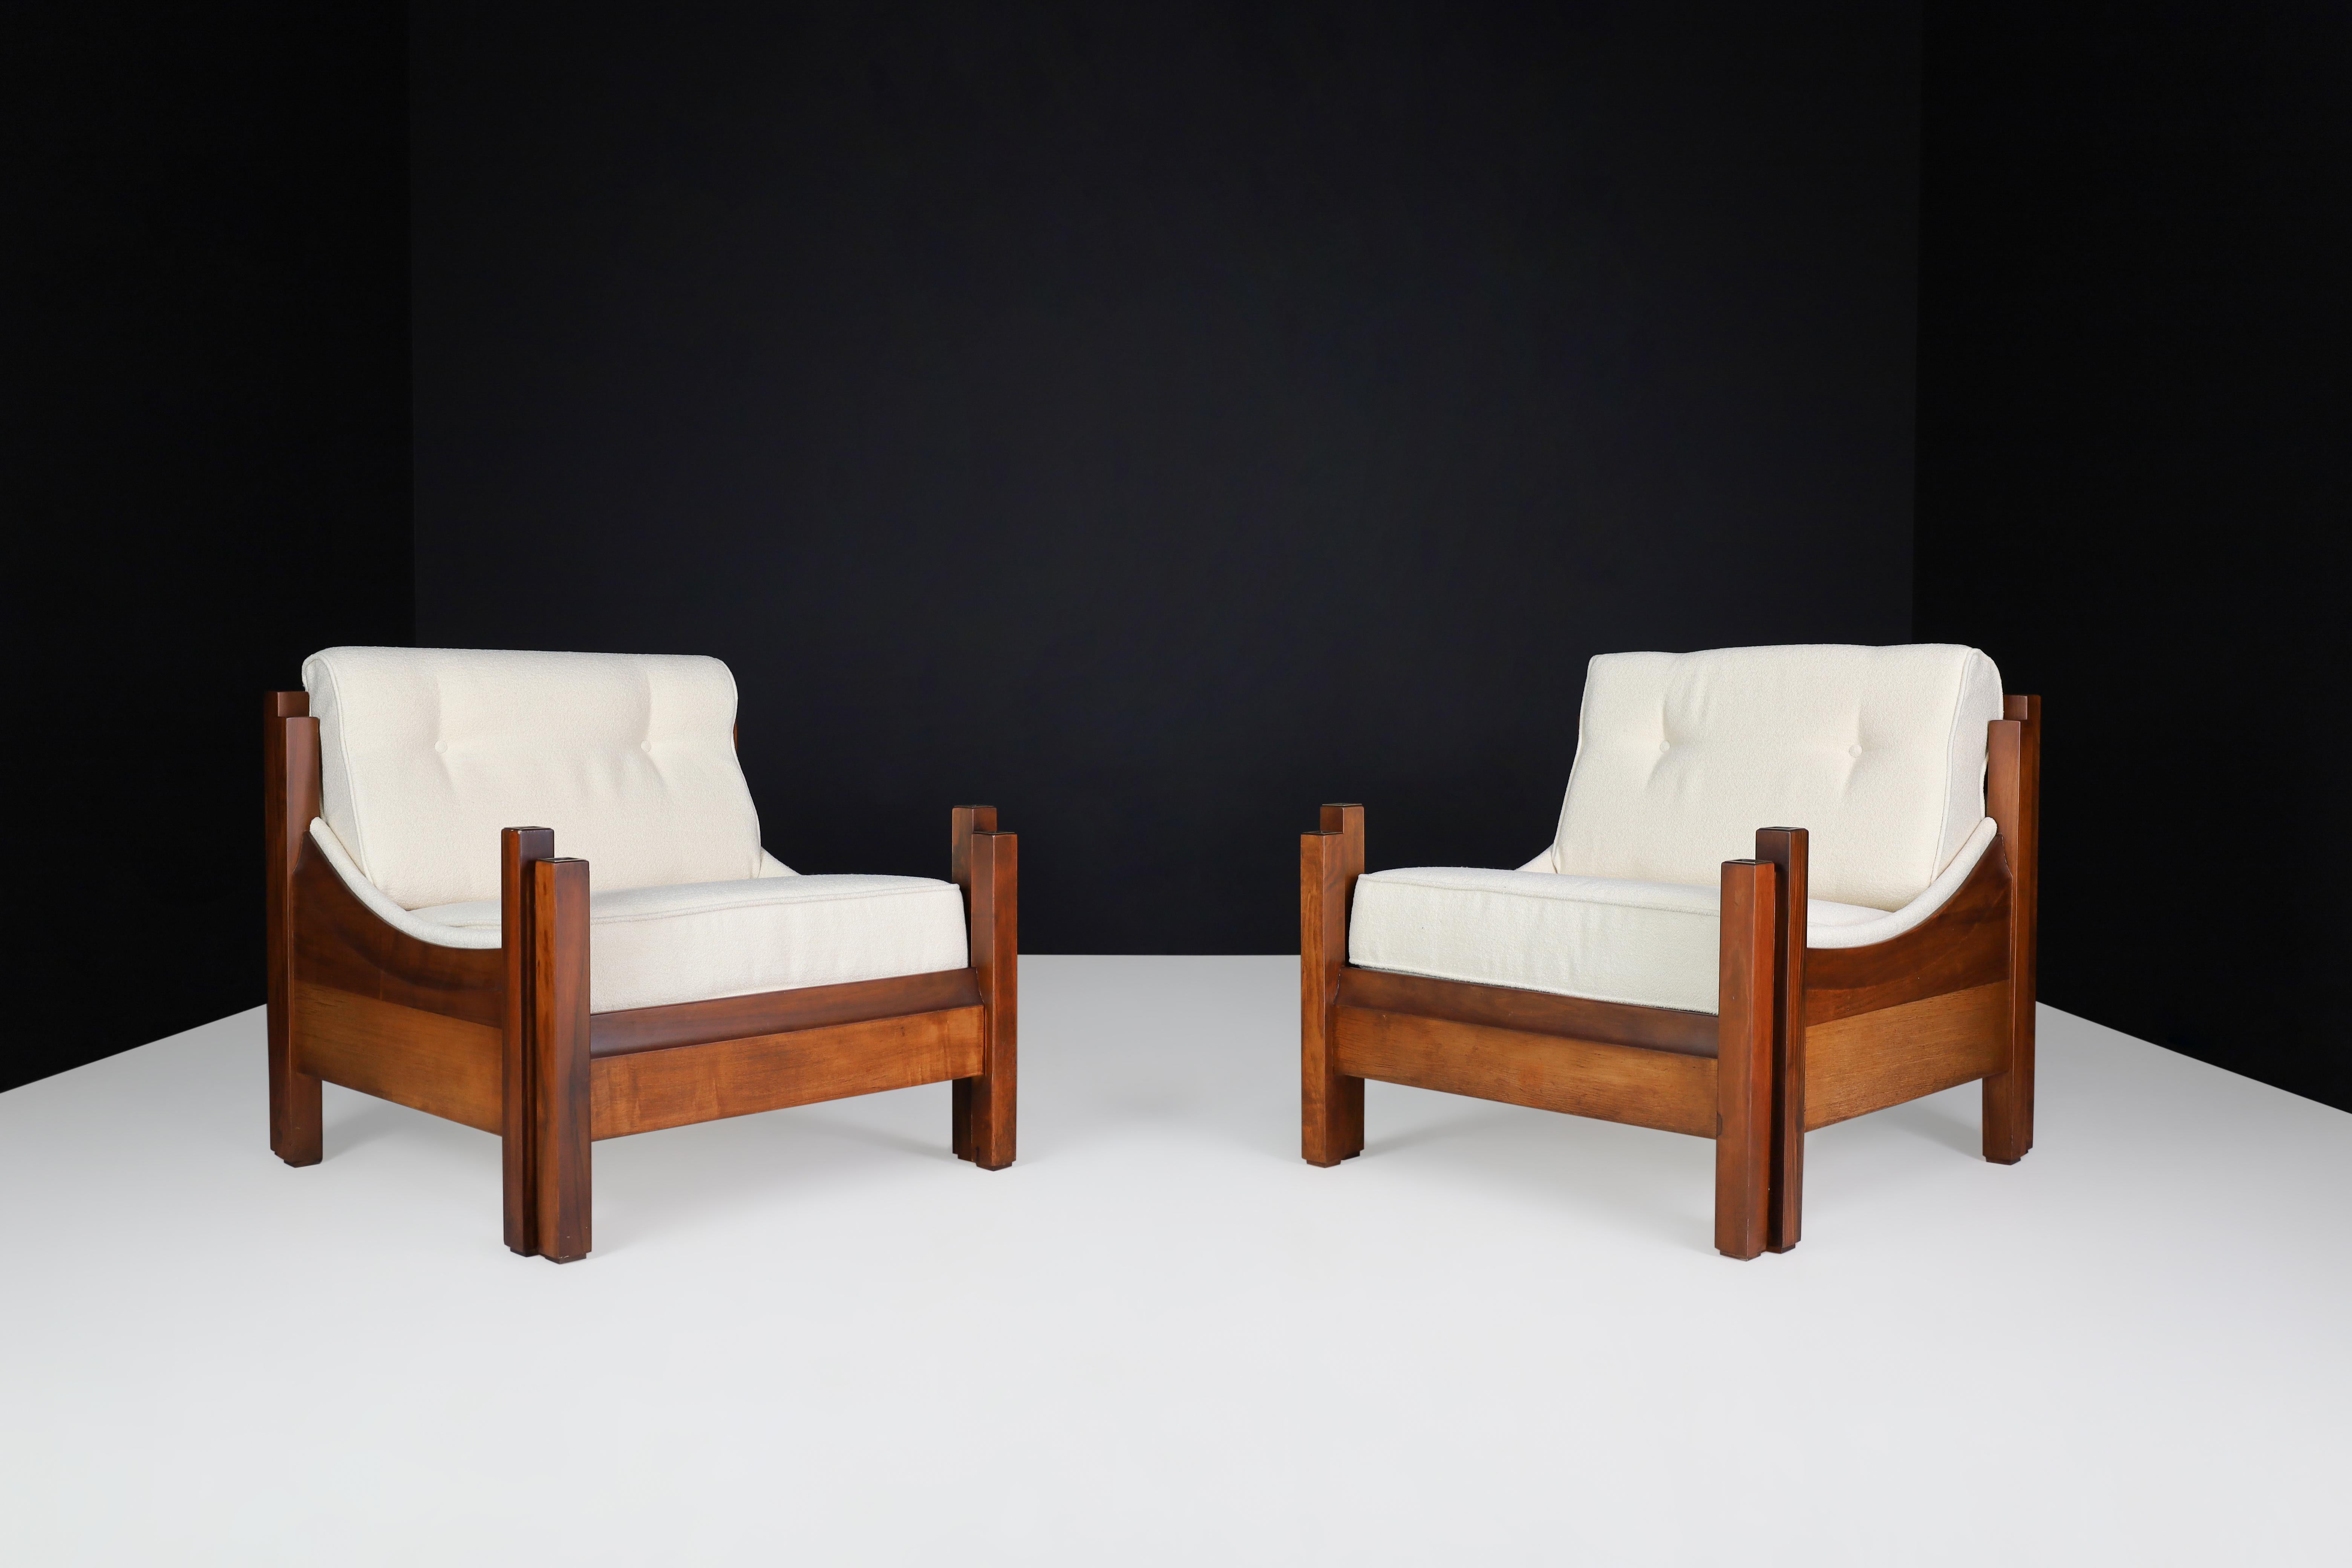 Oversized Lounge chairs in Walnut and Fabric, Italy, 1960s 

Pair large midcentury walnut armchairs or lounge chairs manufactured and designed in Italy 1960s, made of solid walnut, and professionally reupholstered in new fabric. These decorative